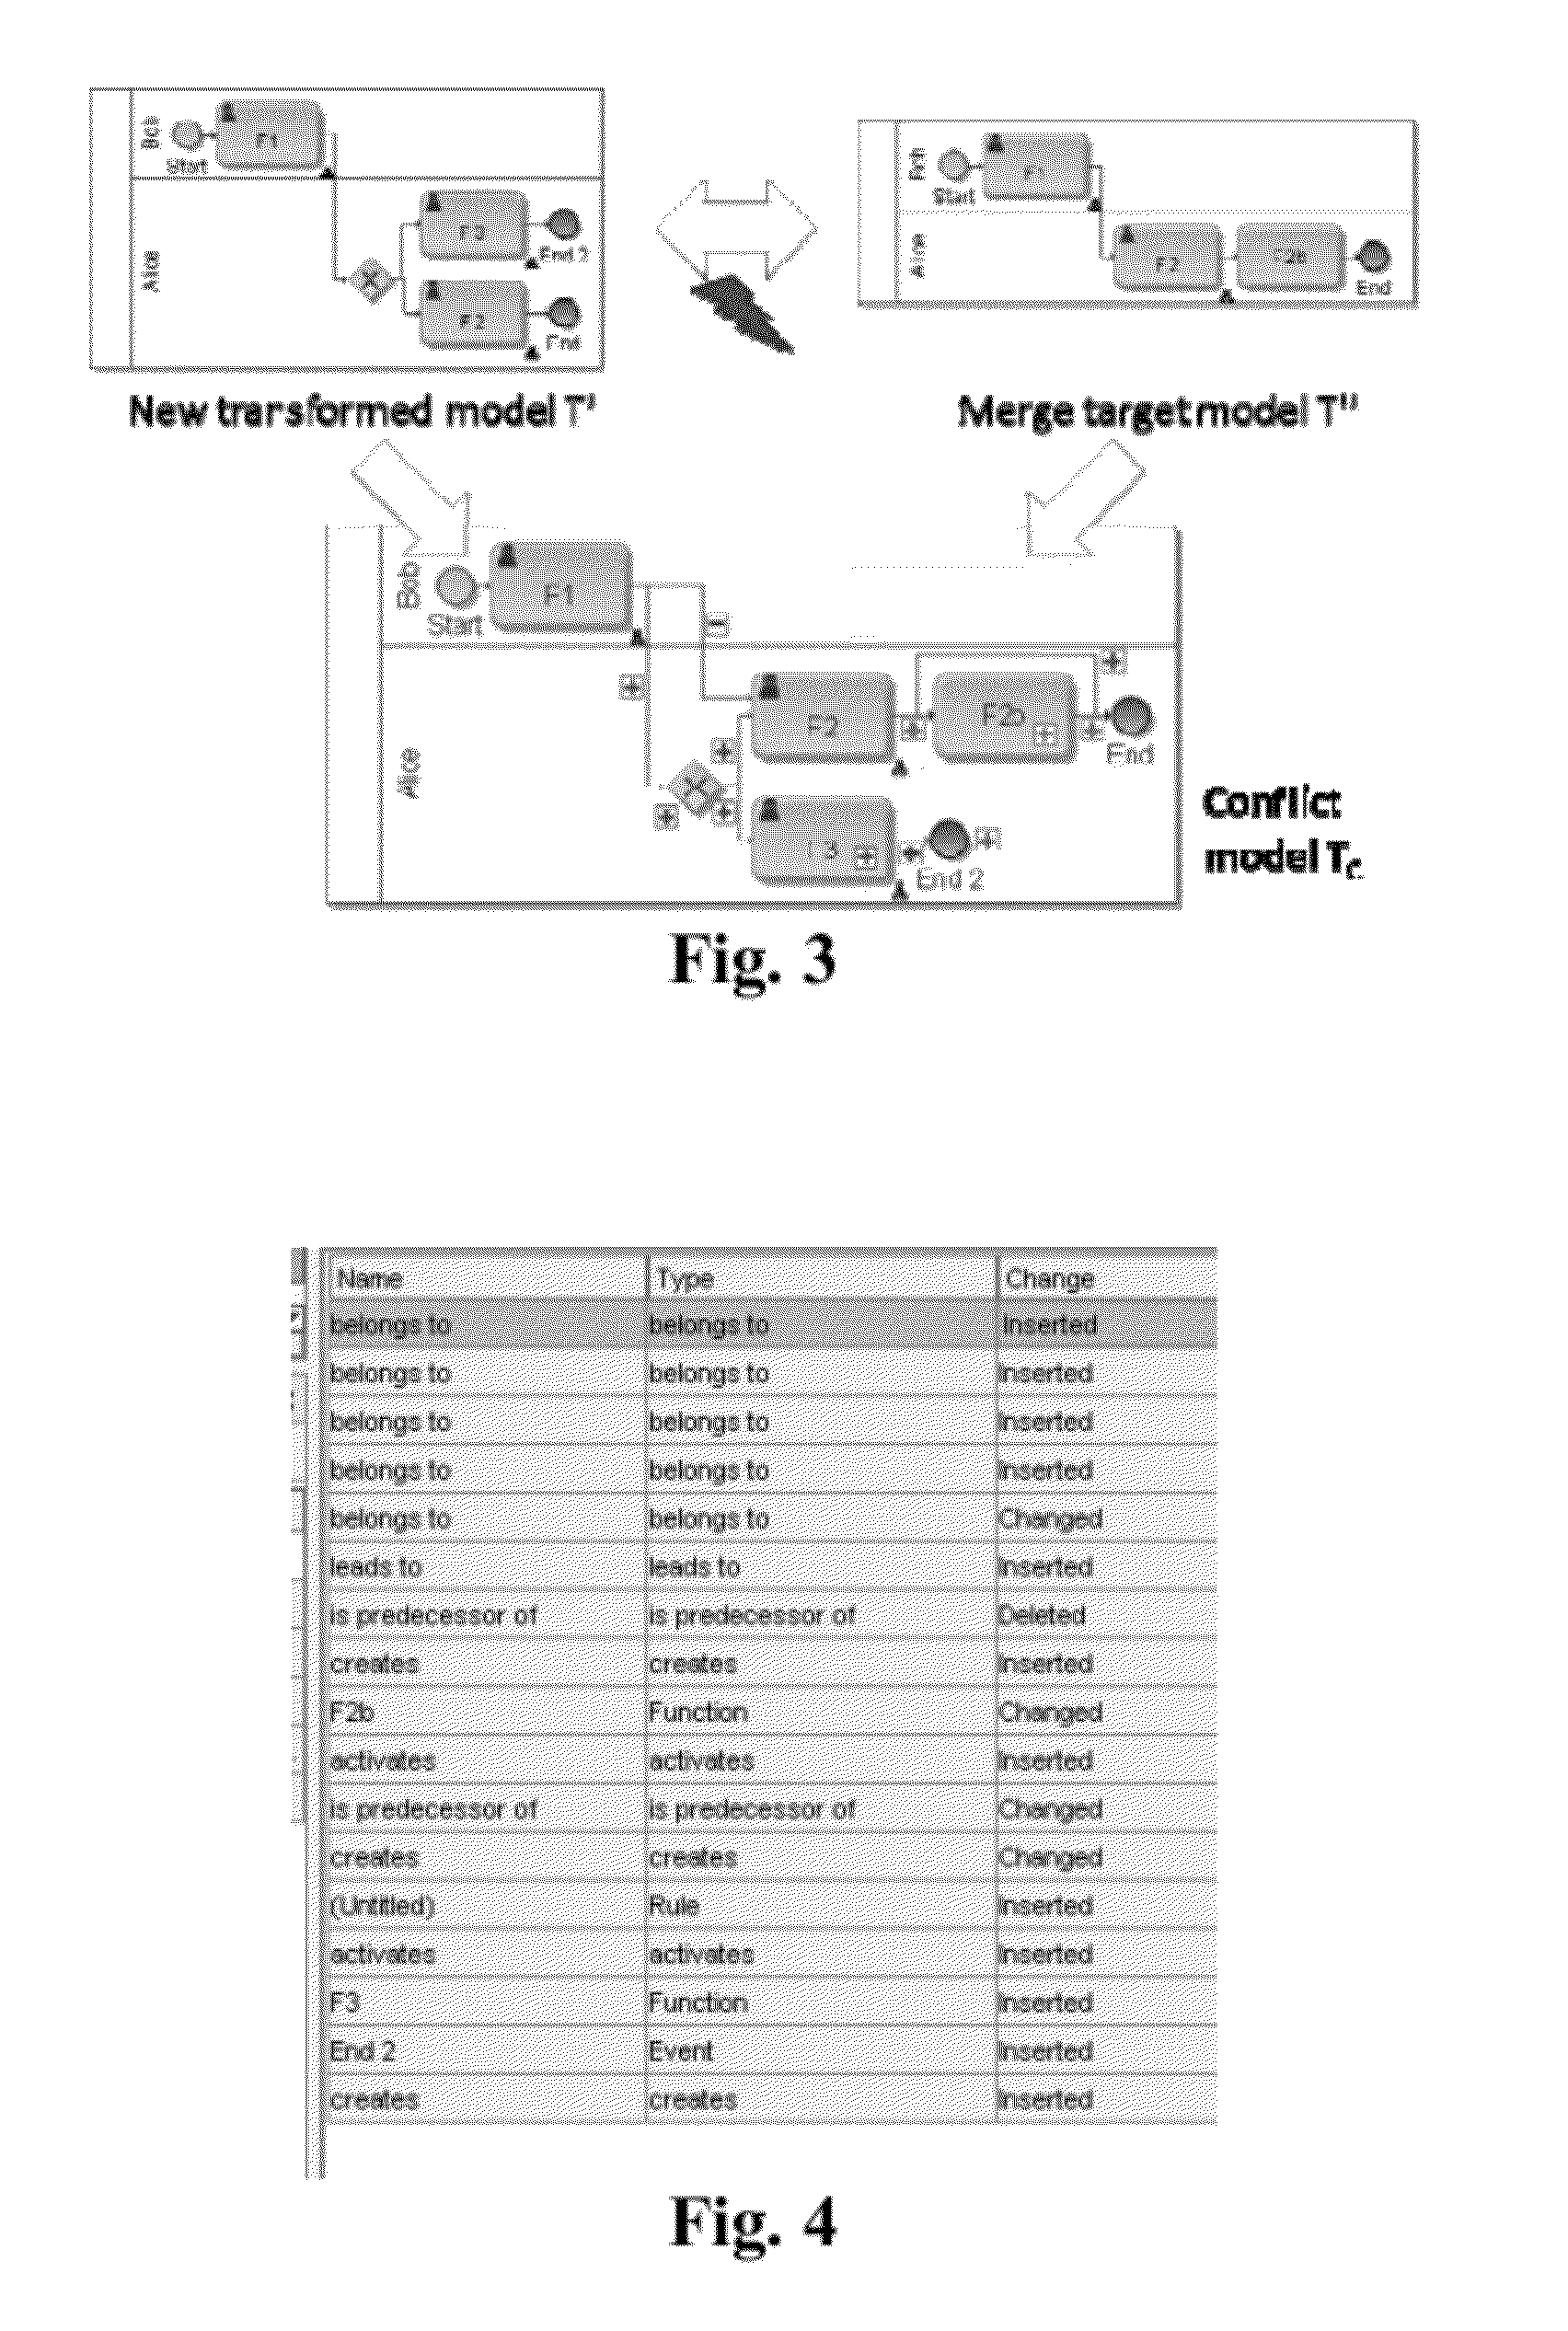 Systems and/or methods for identifying and resolving complex model merge conflicts based on atomic merge conflicts